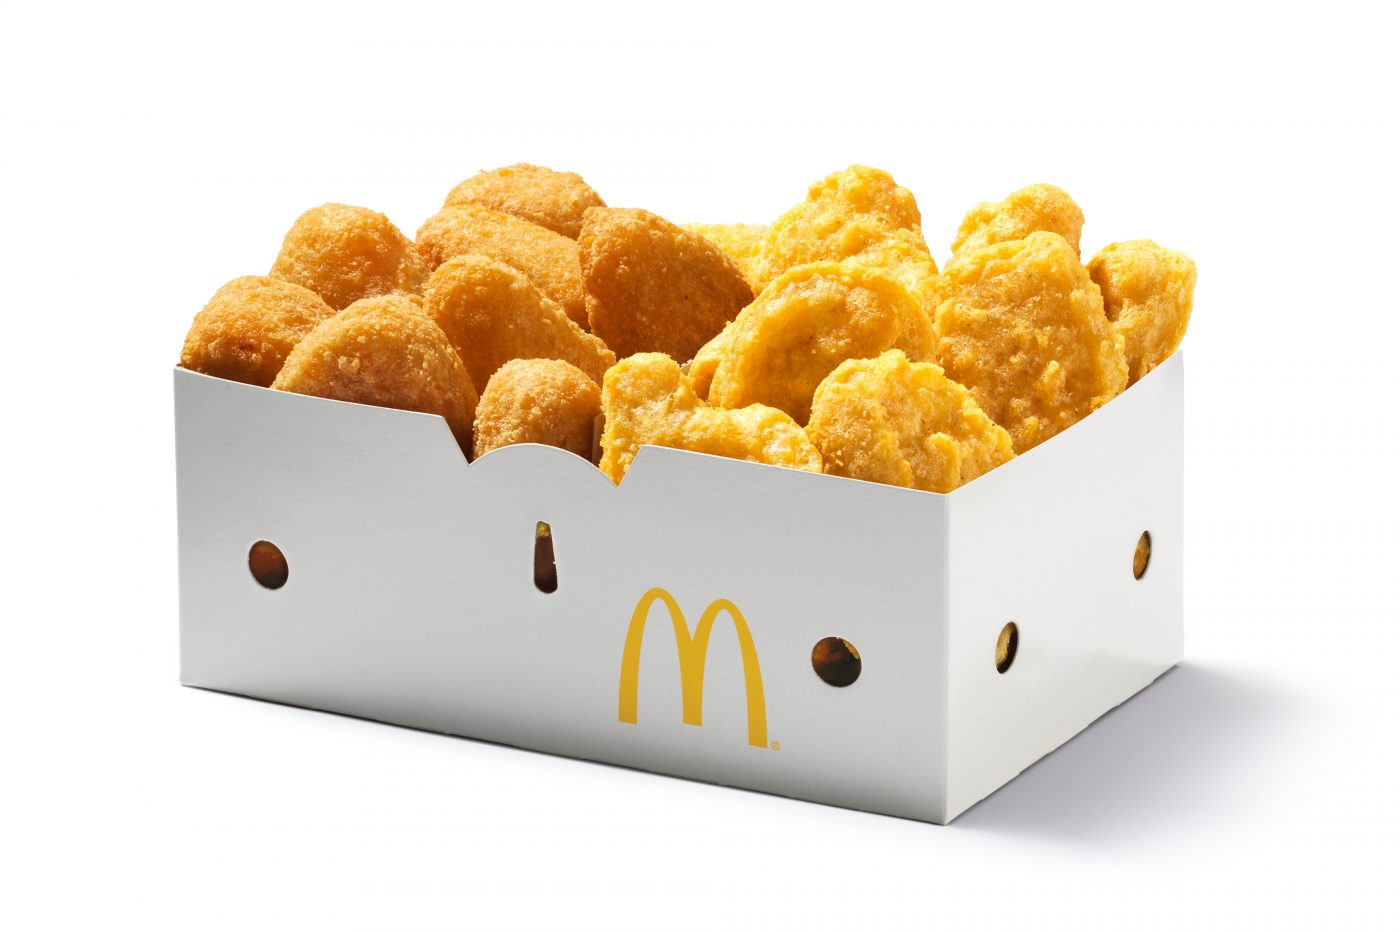 Promotion Mc Donald's Oktoberfest 2019, a fan box with Chicken Mc Nuggets and cheese peaks lies on a white background.